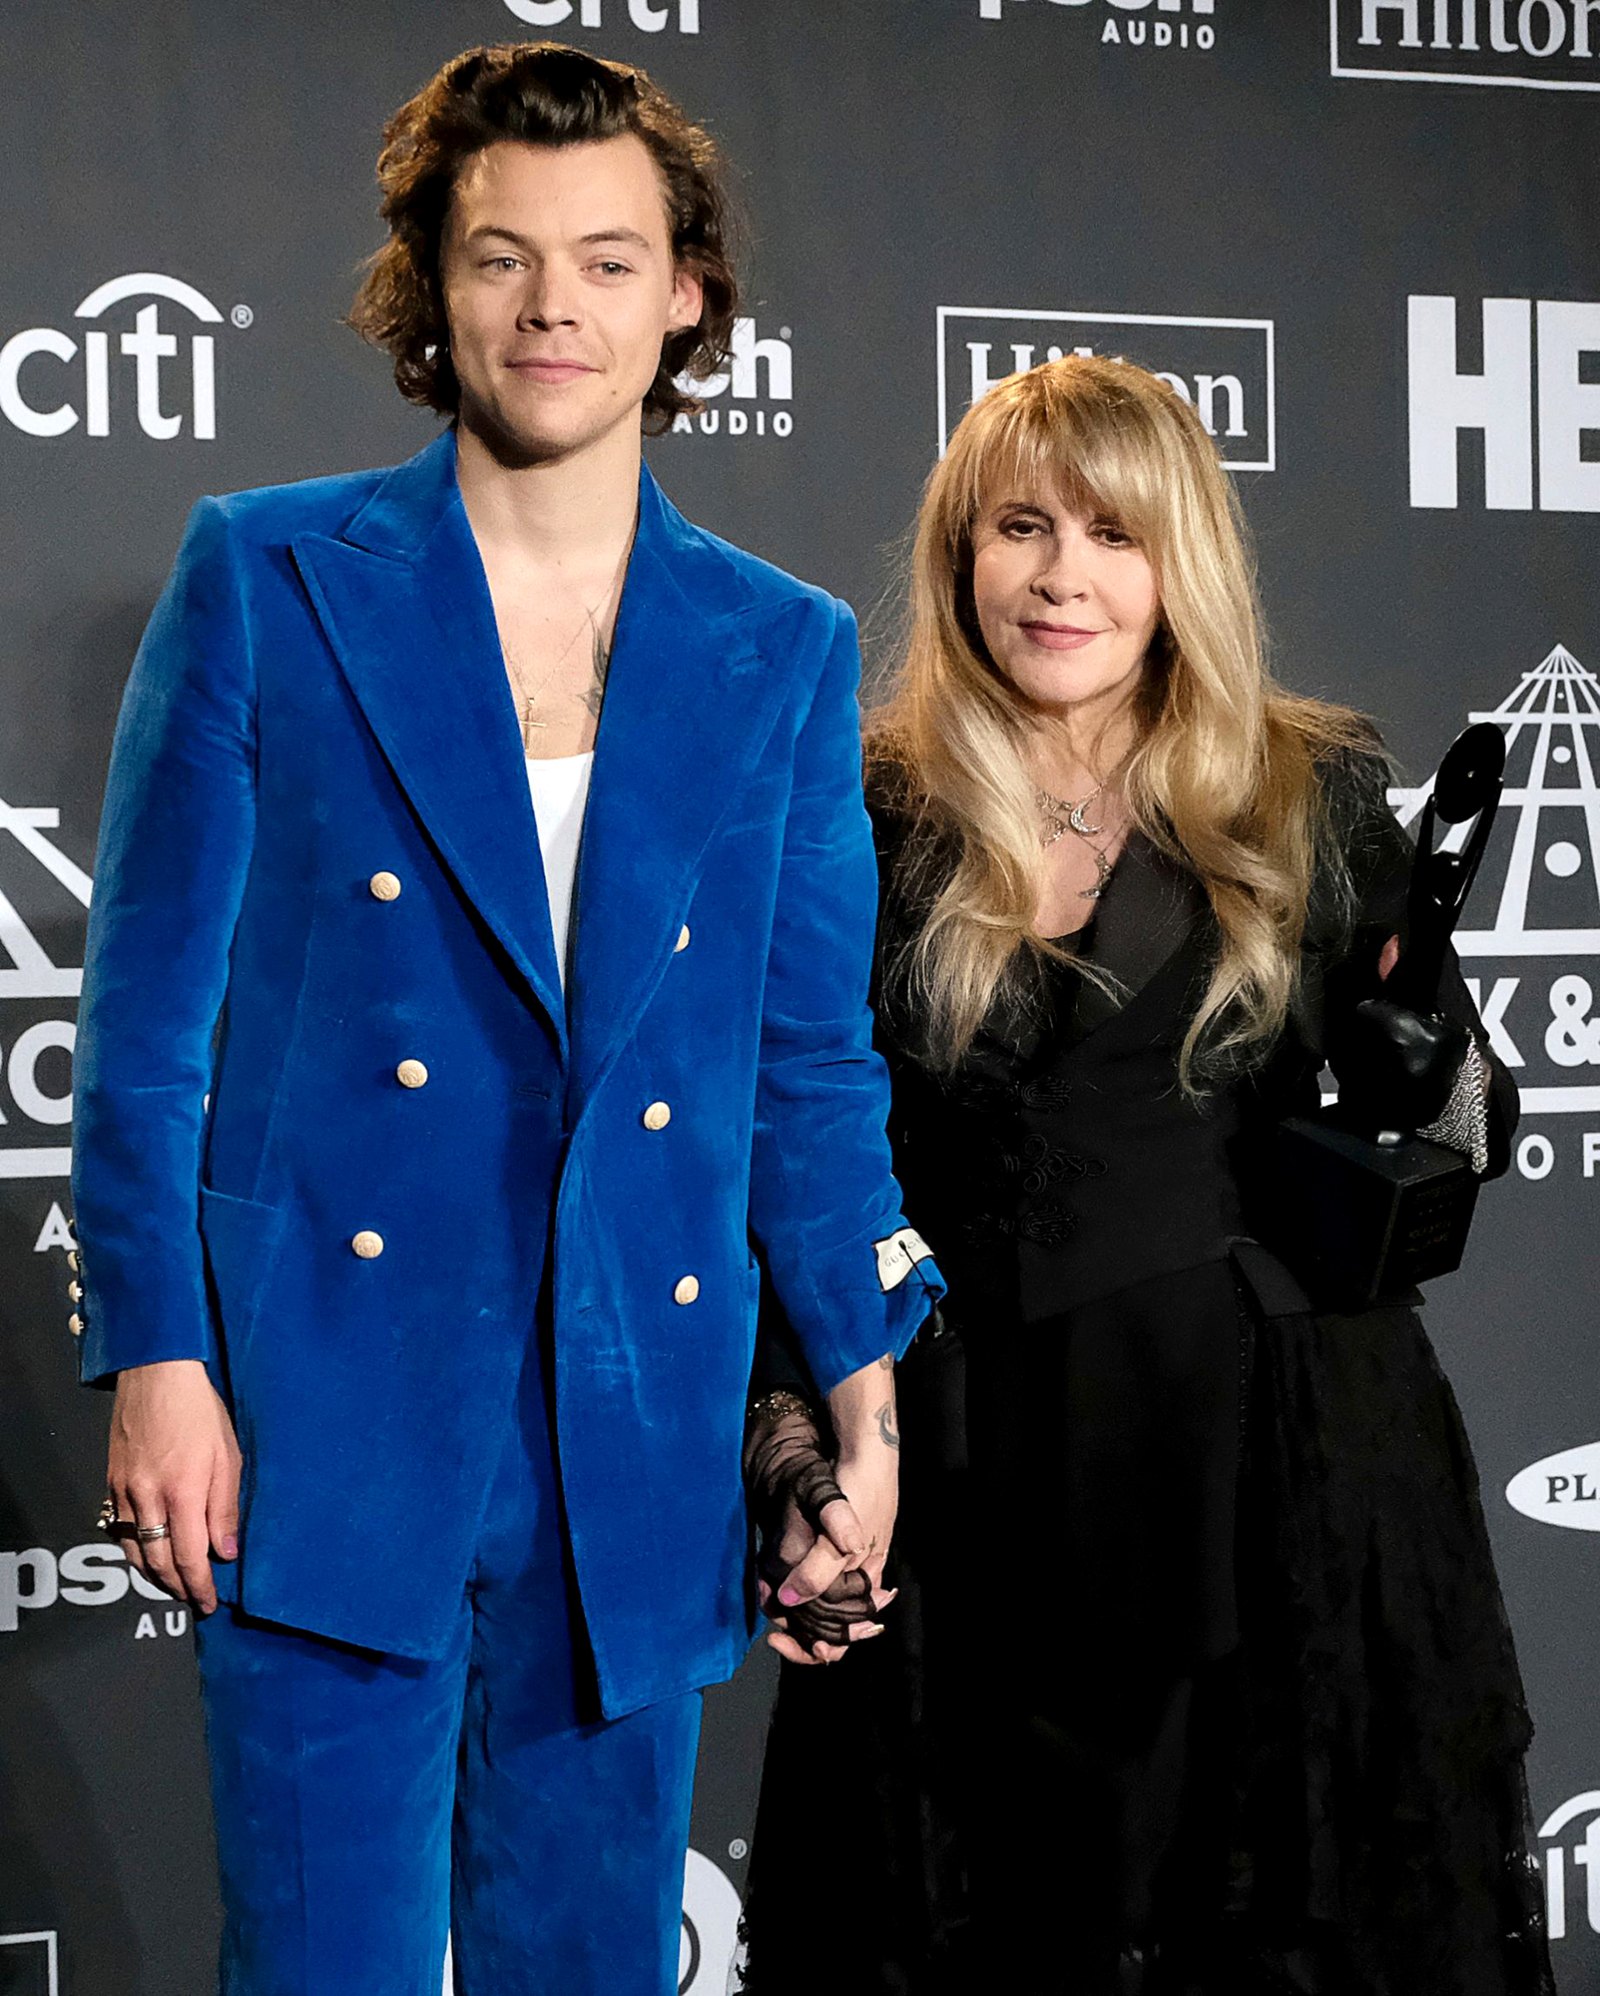 Harry Styles' Friendship With Stevie Nicks: A Complete History